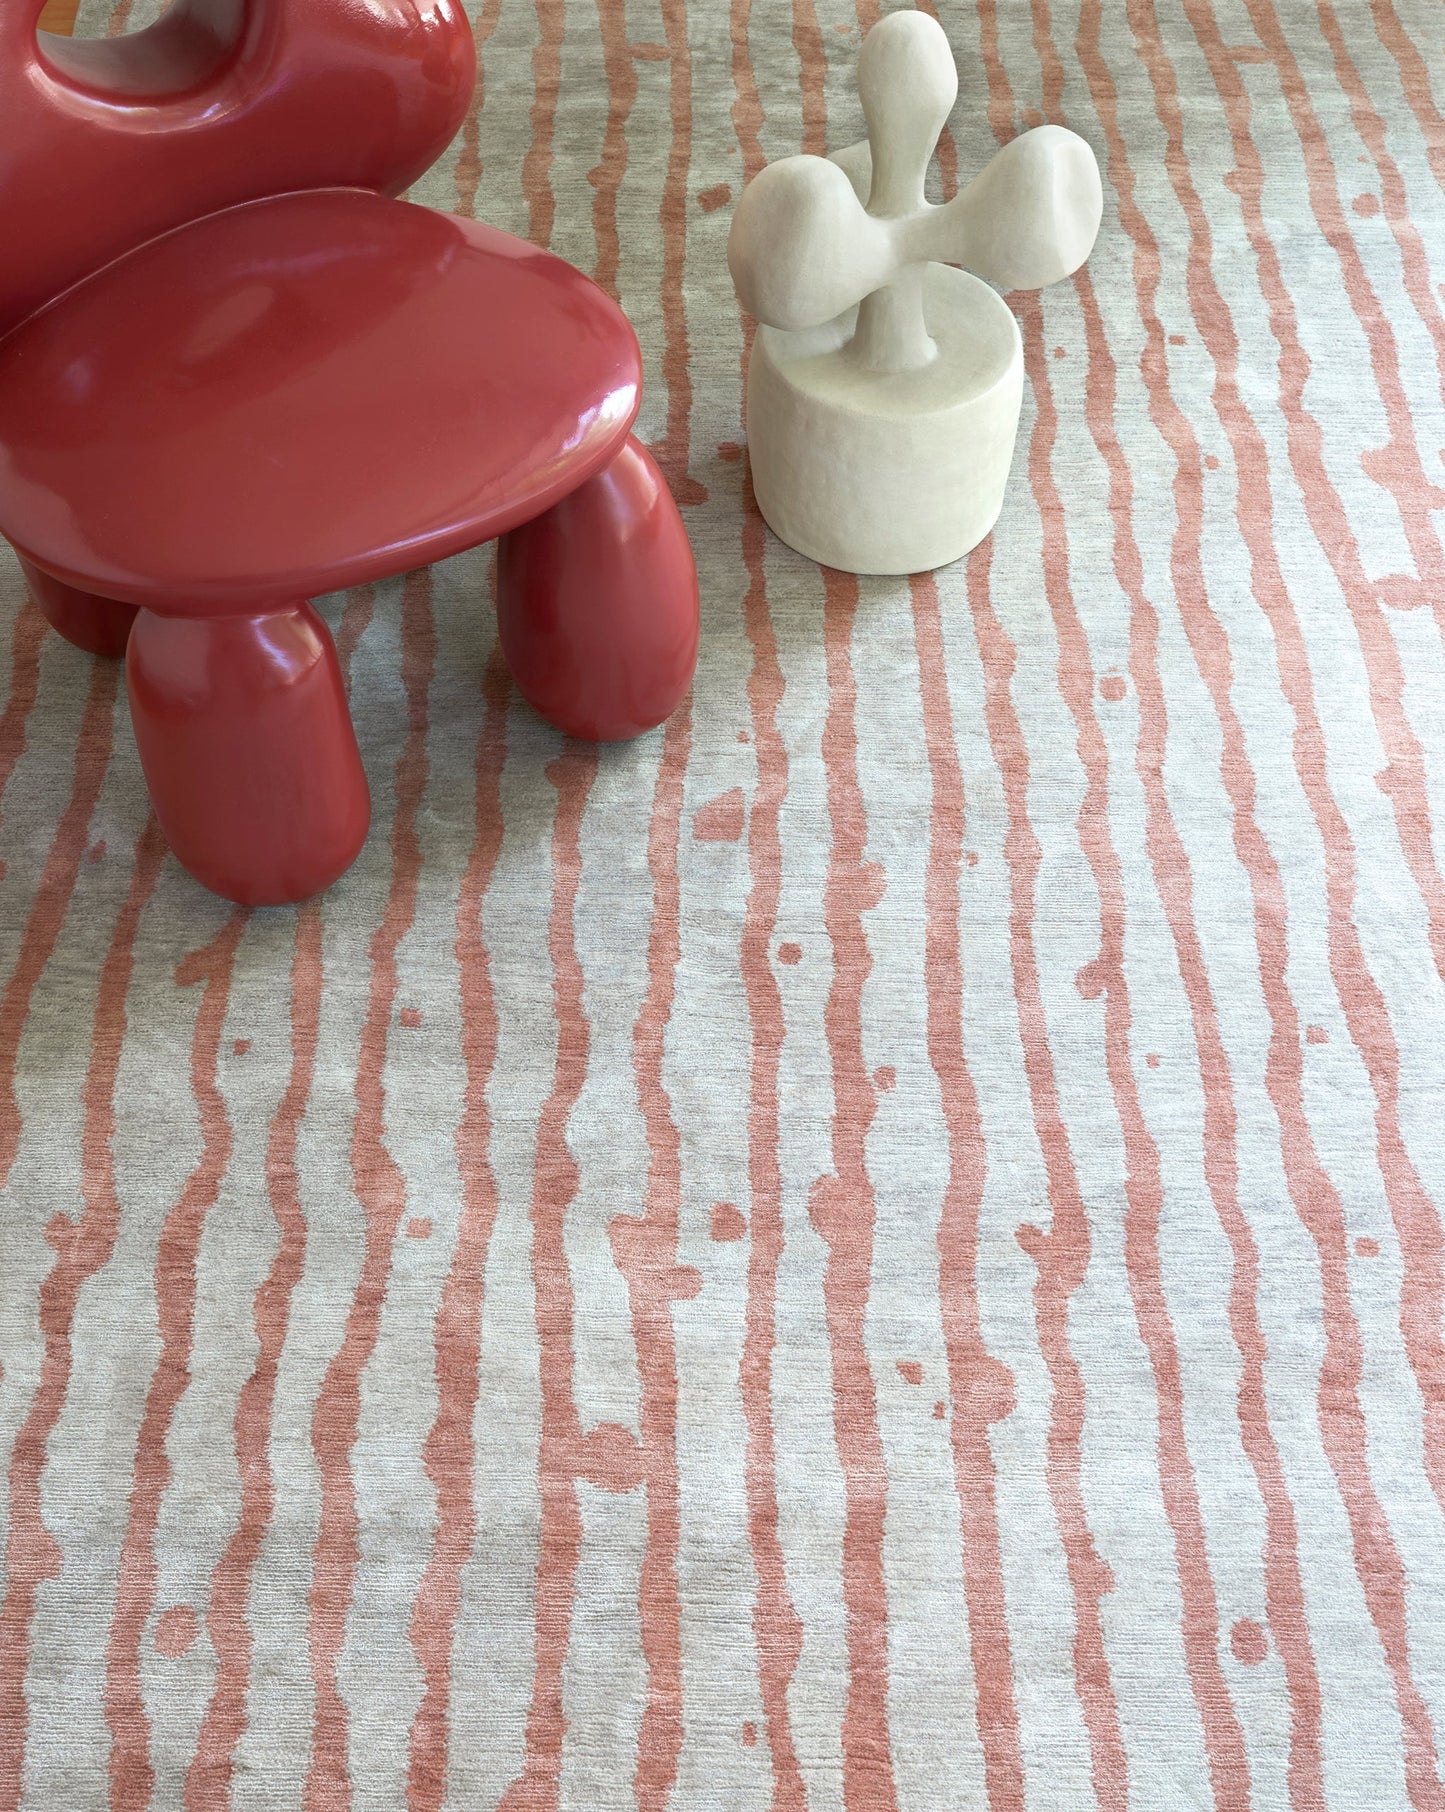 A red chair on a Drippy Stripe Hand Knotted Rug 6' x 9' Sienna next to a cactus